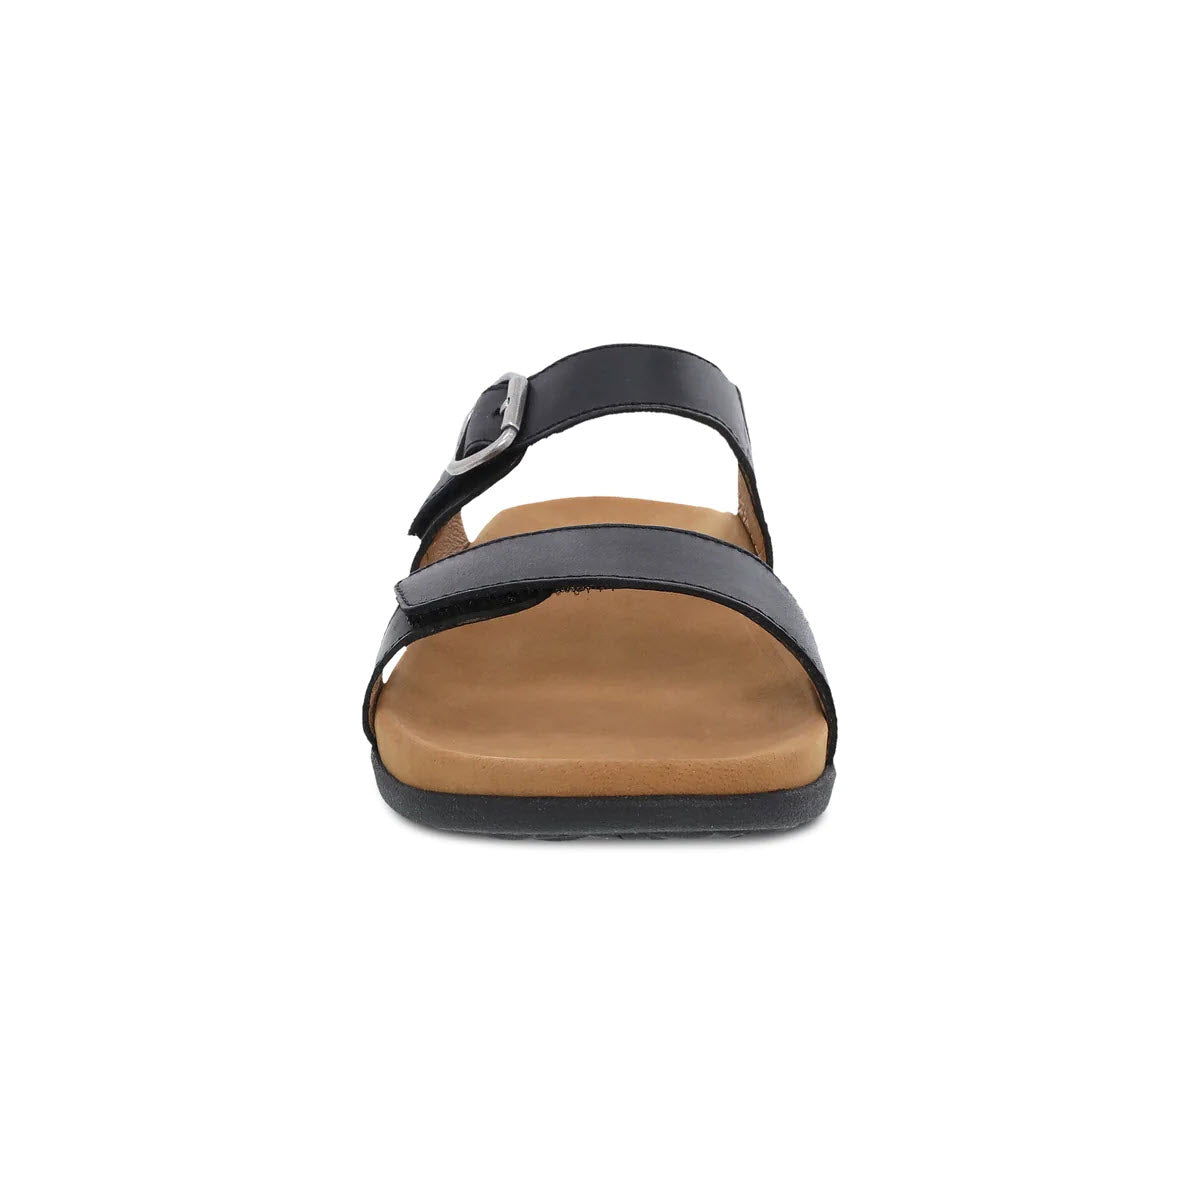 A single Dansko Justine Black slide sandal with a buckle, viewed from the front, isolated on a white background.